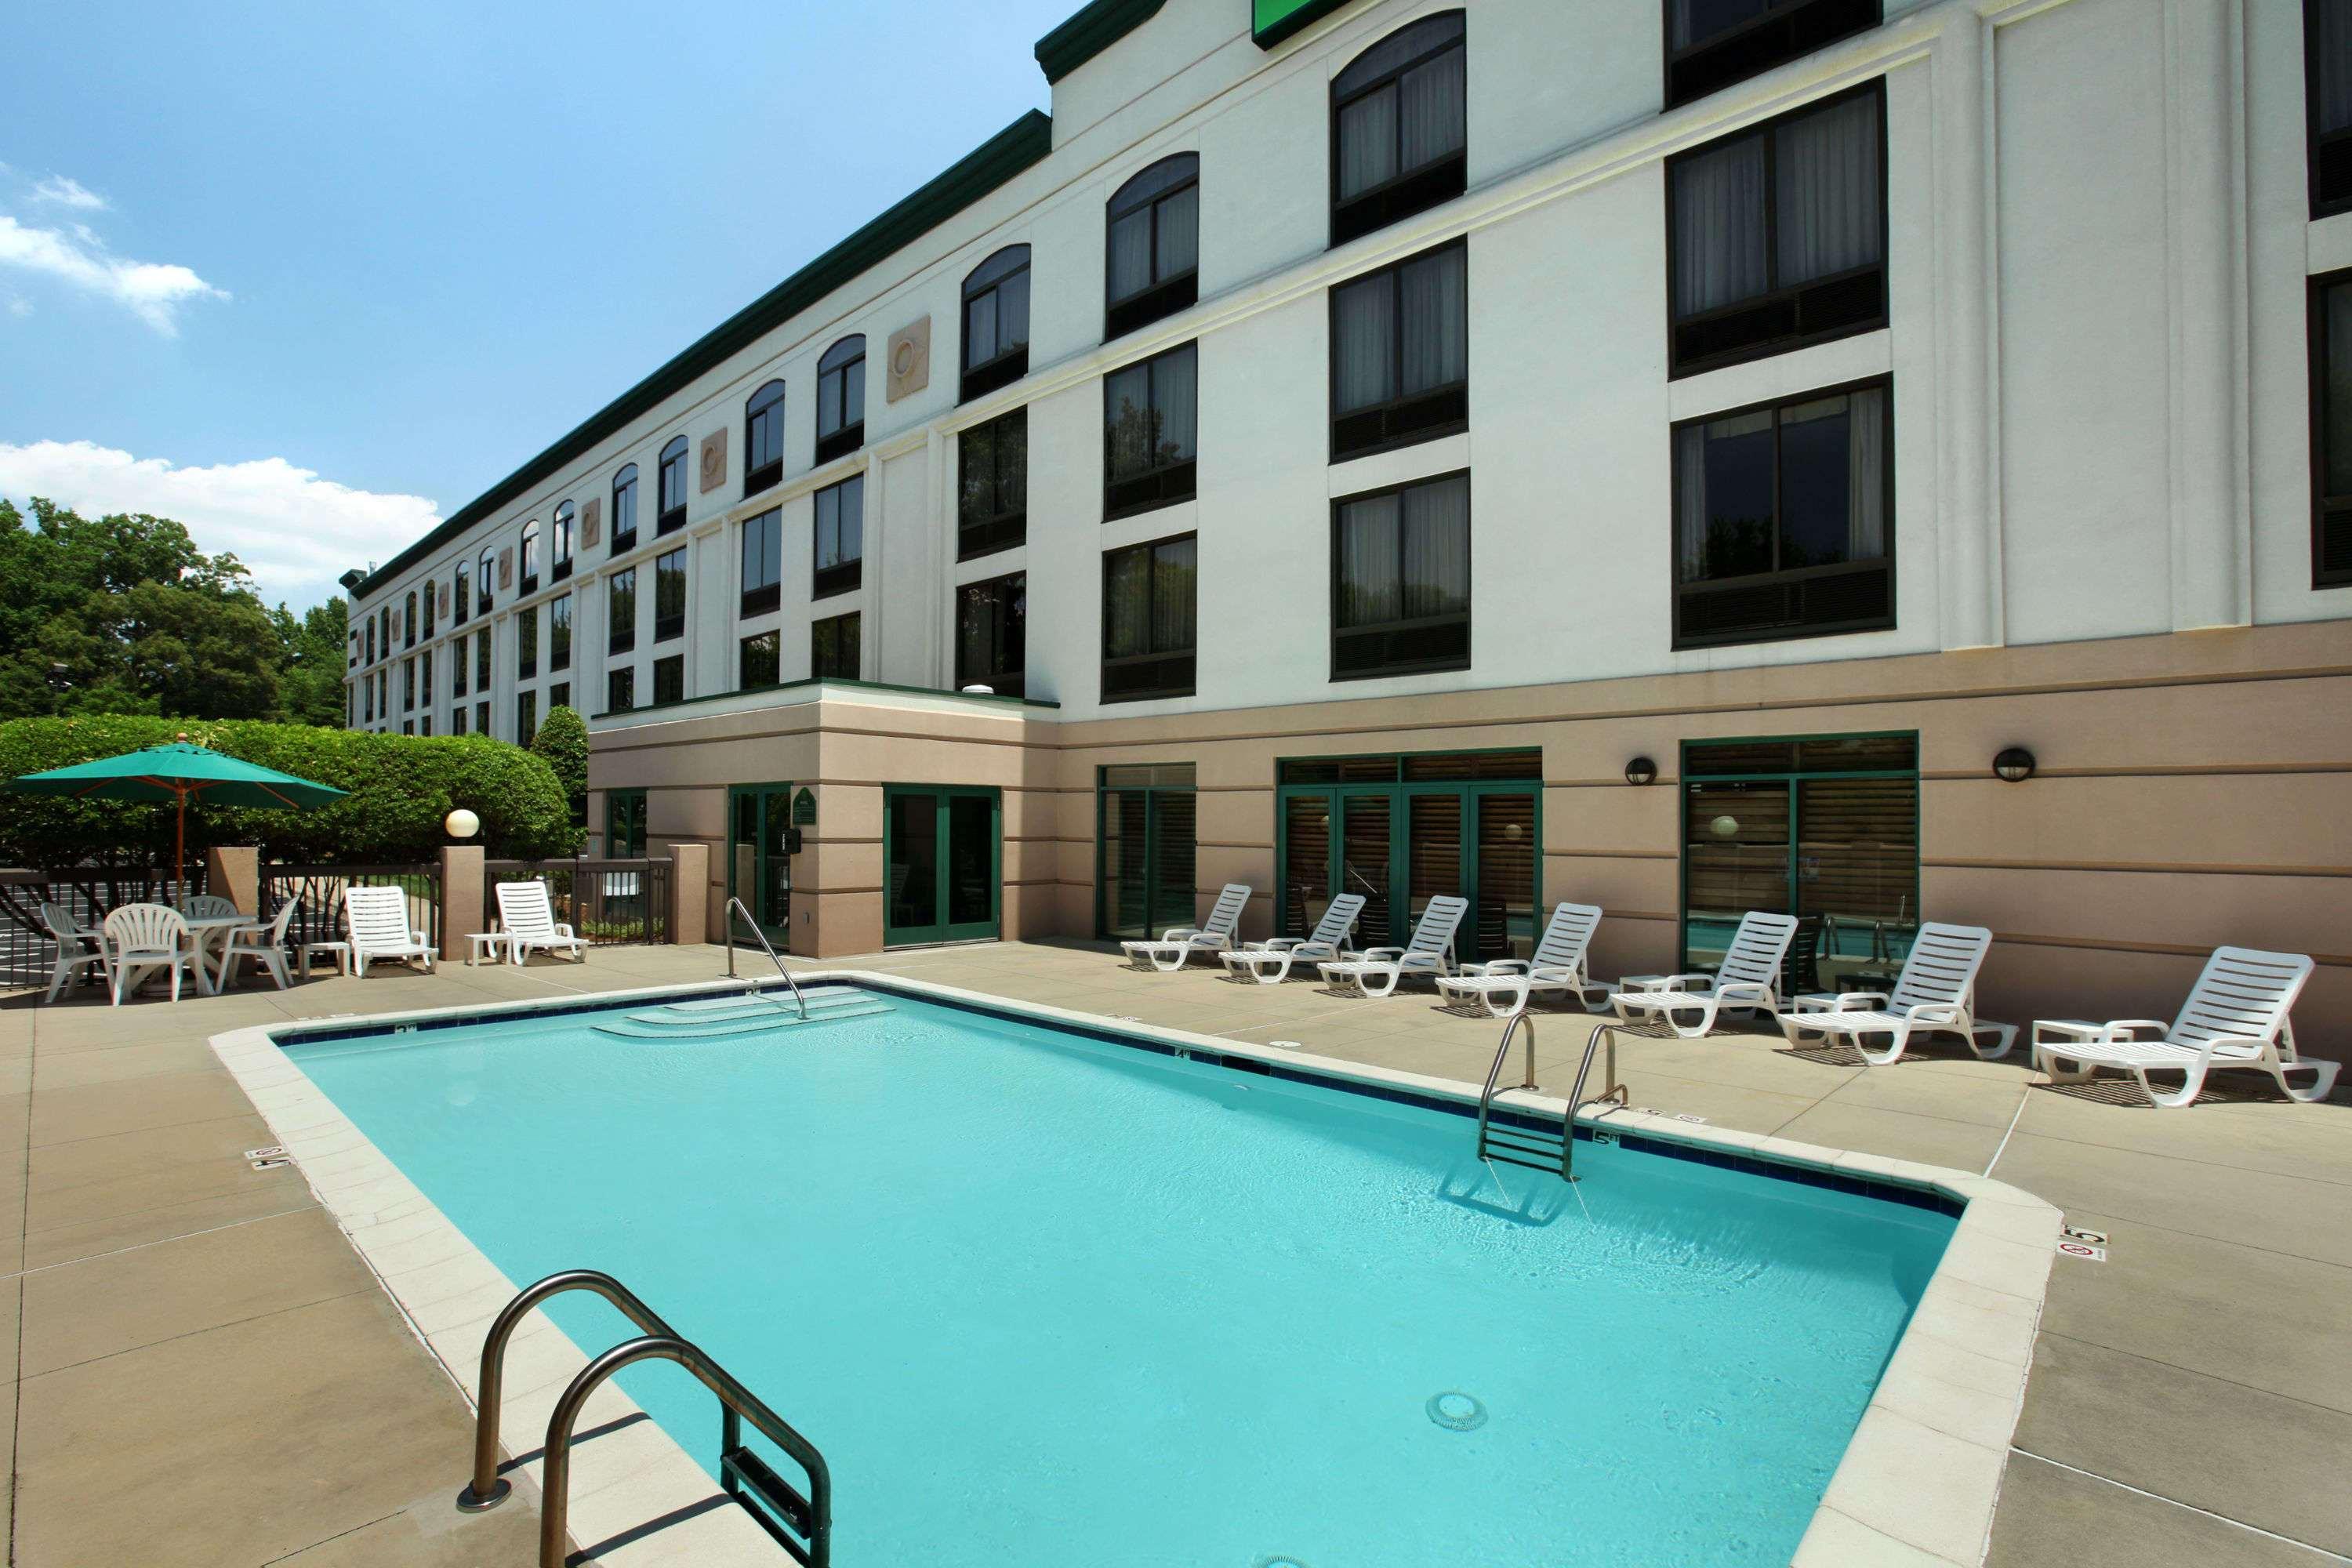 Wingate by Wyndham Charlotte Airport South/ I-77 Tyvola